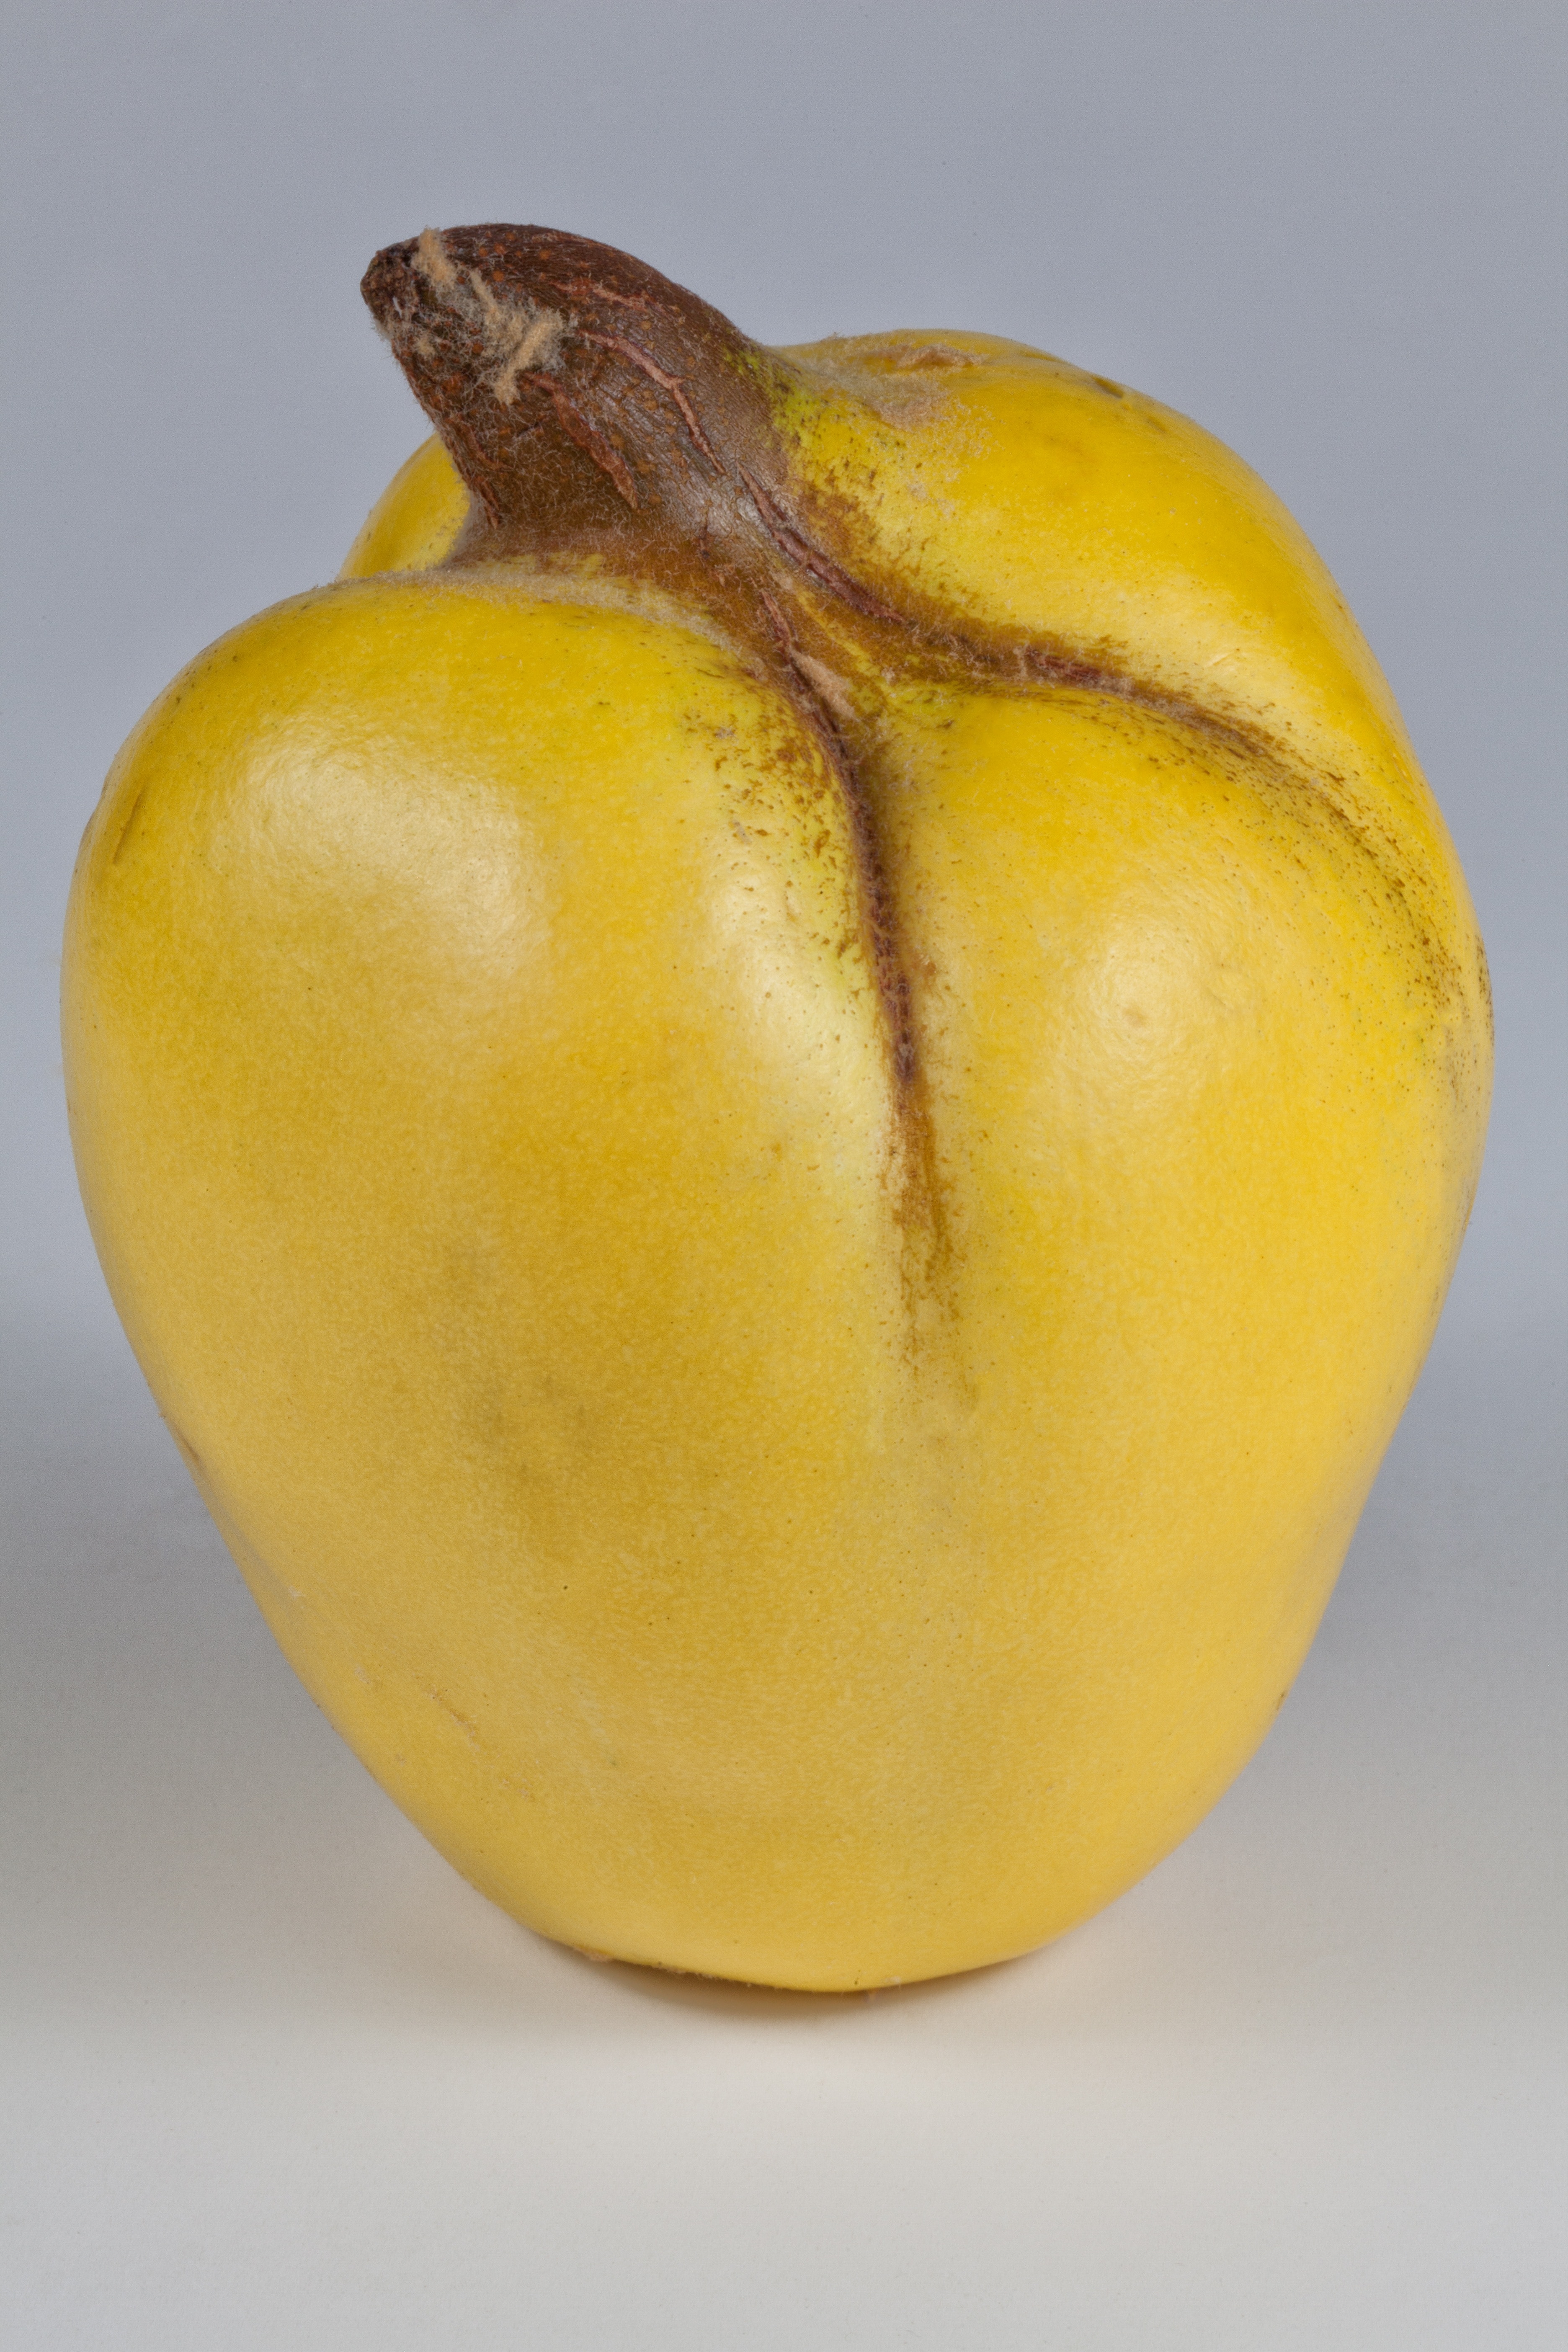 brown and yellow fruit